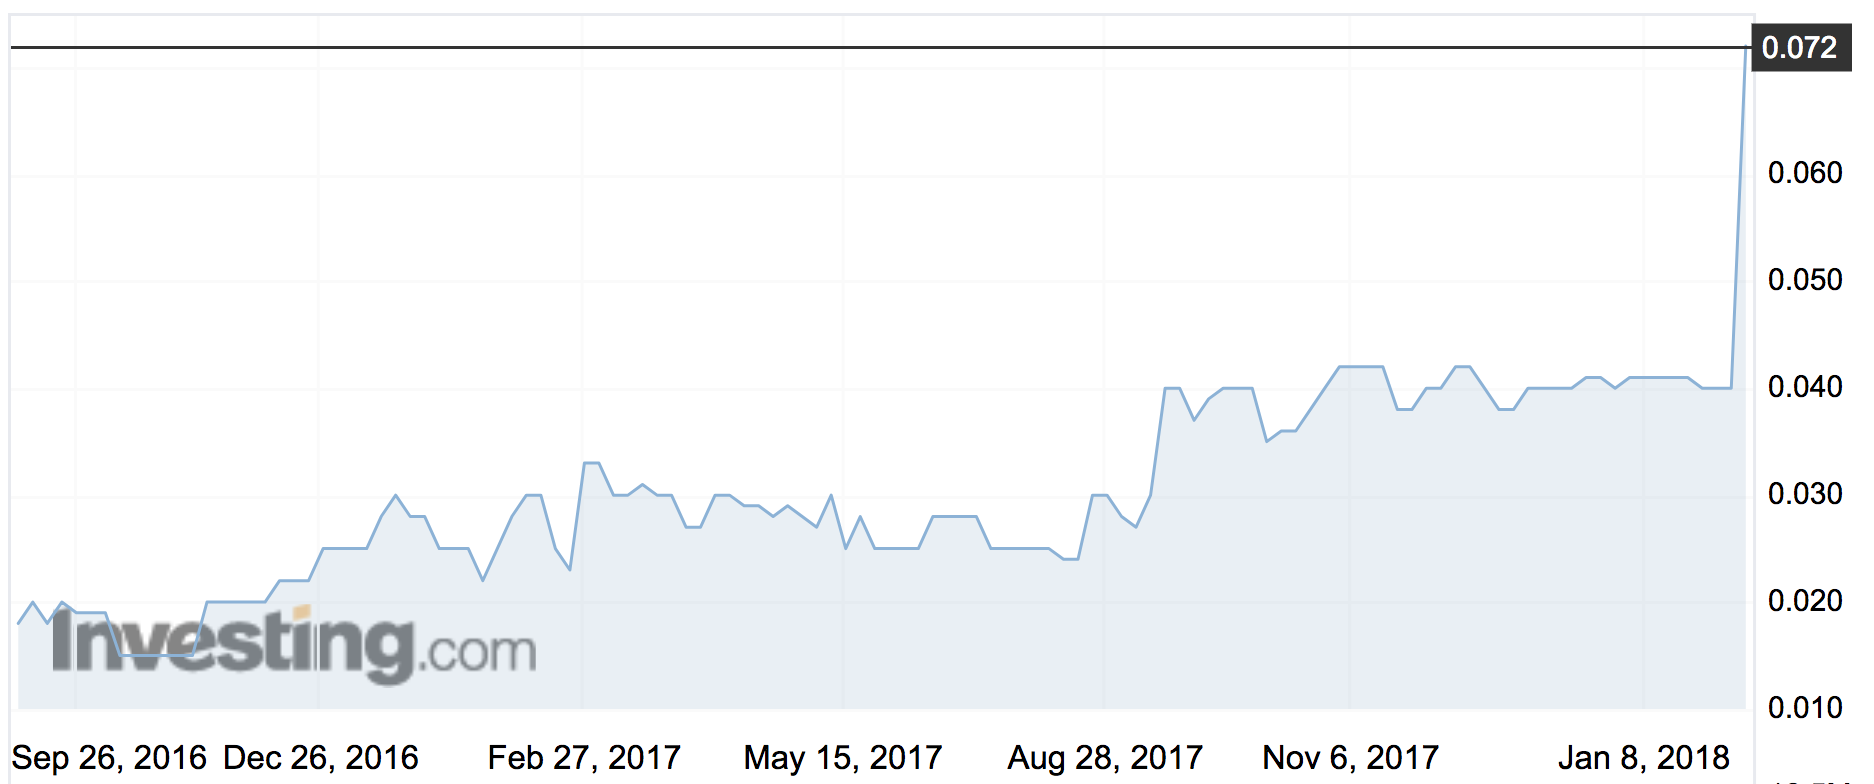 Po Valley shares over the past five months. Source: Investing.com